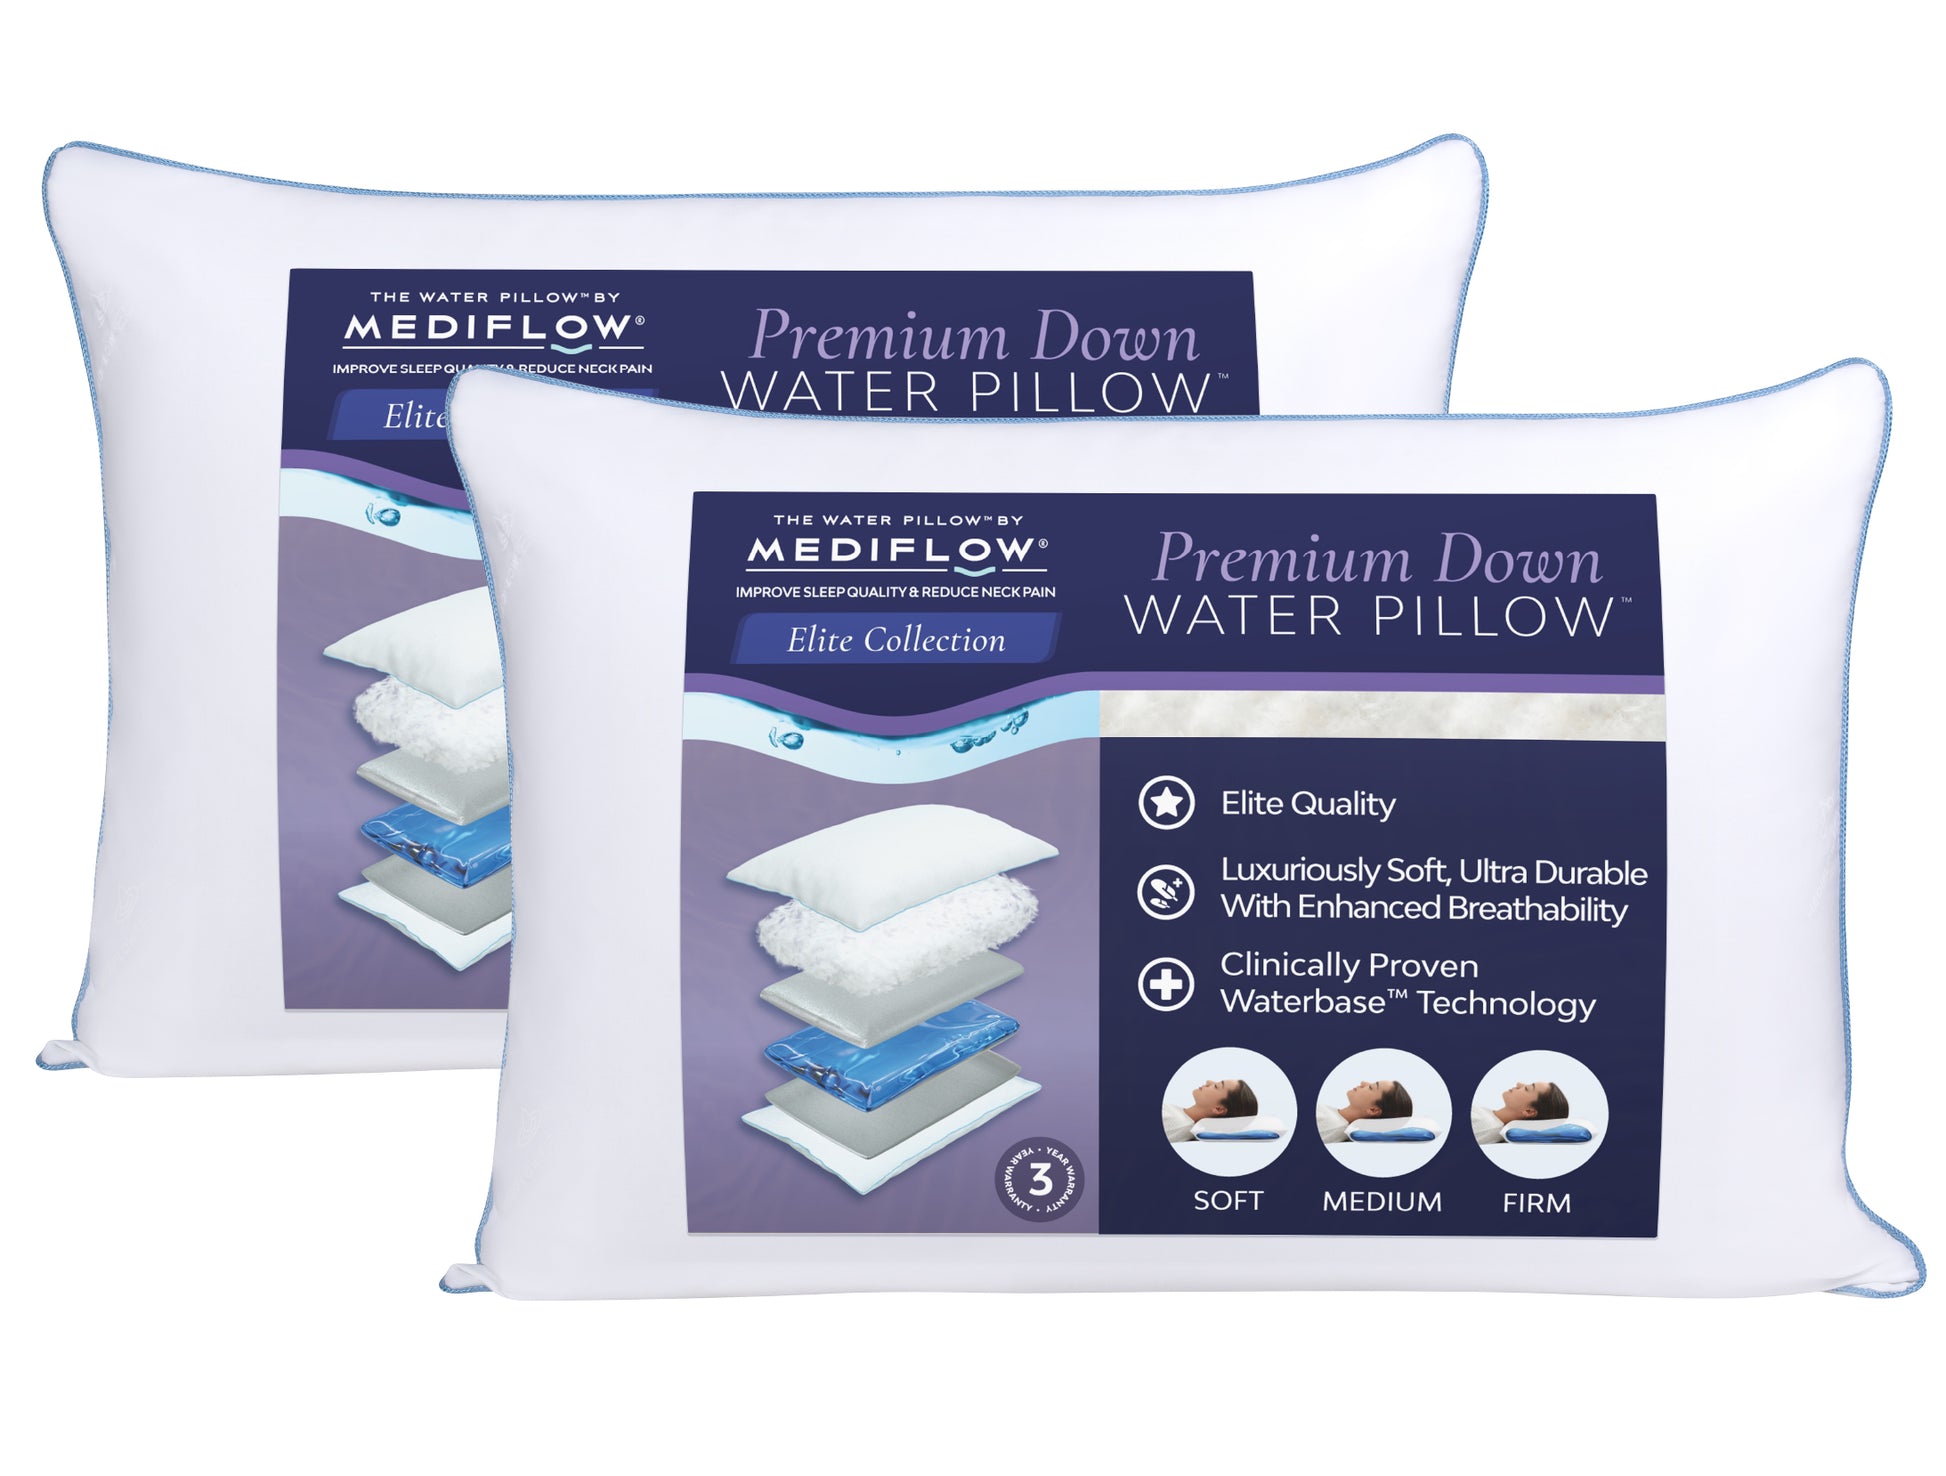 Organic Travel Pillow (10X24) USA Made, Adjustable, Hypoallergenic White - Percale